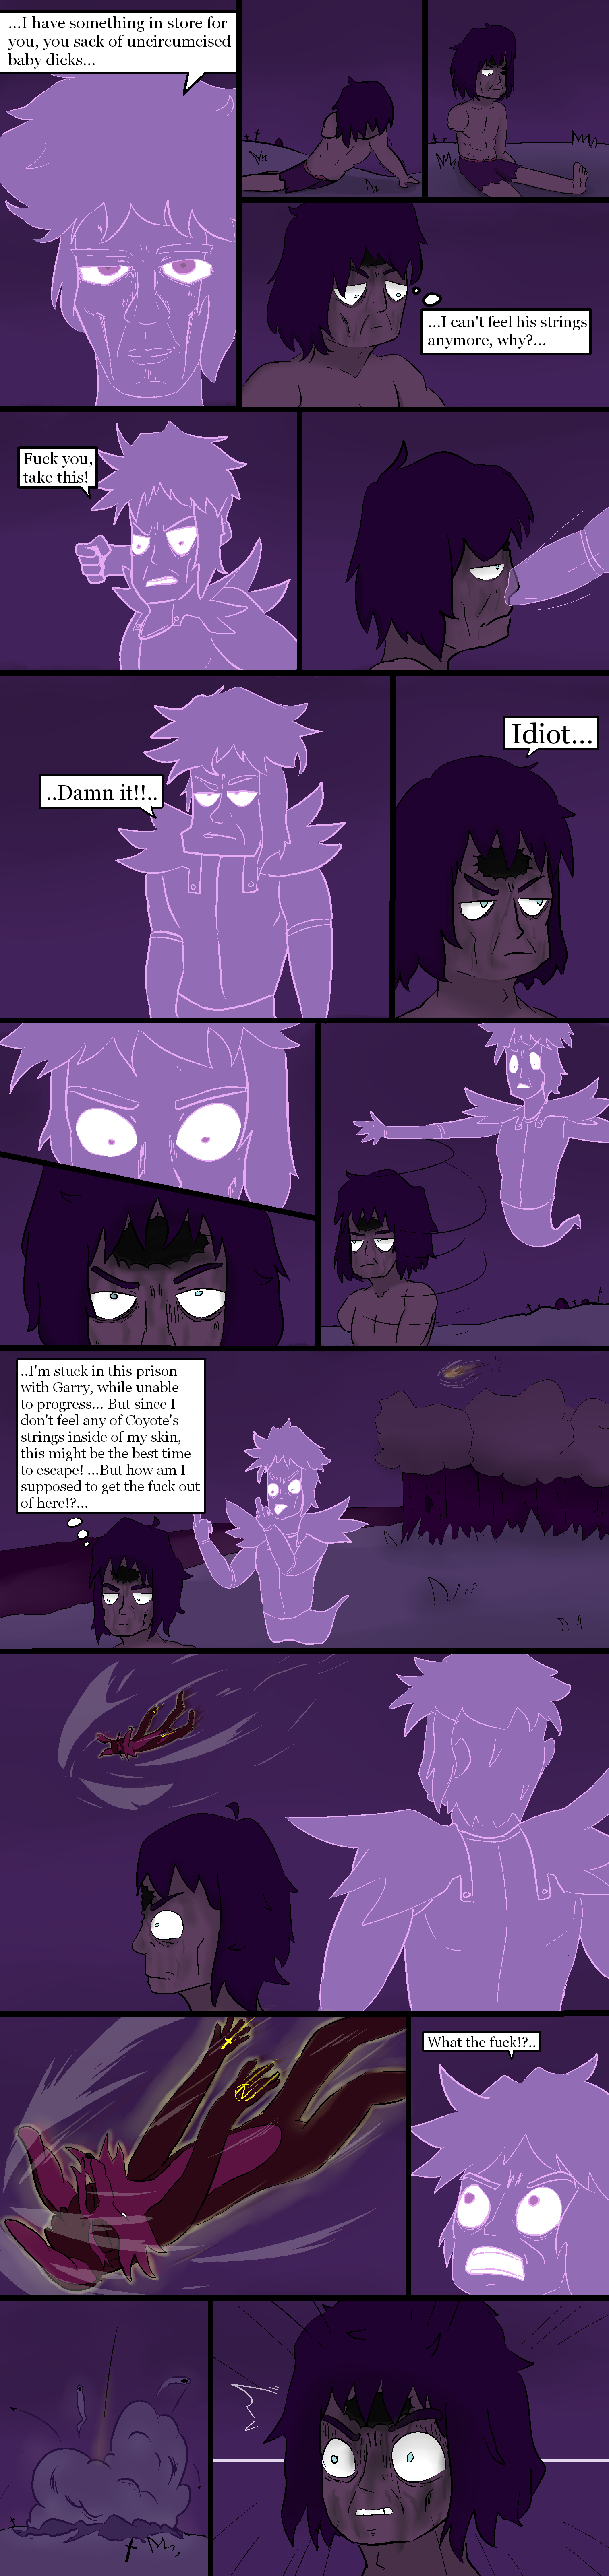 ch25/pg25.png. If you're seeing this, enable images. Or, perhaps we have a website issue. Try refreshing, if unsuccessful email c@commodorian.org with a detailed description of how you got here.